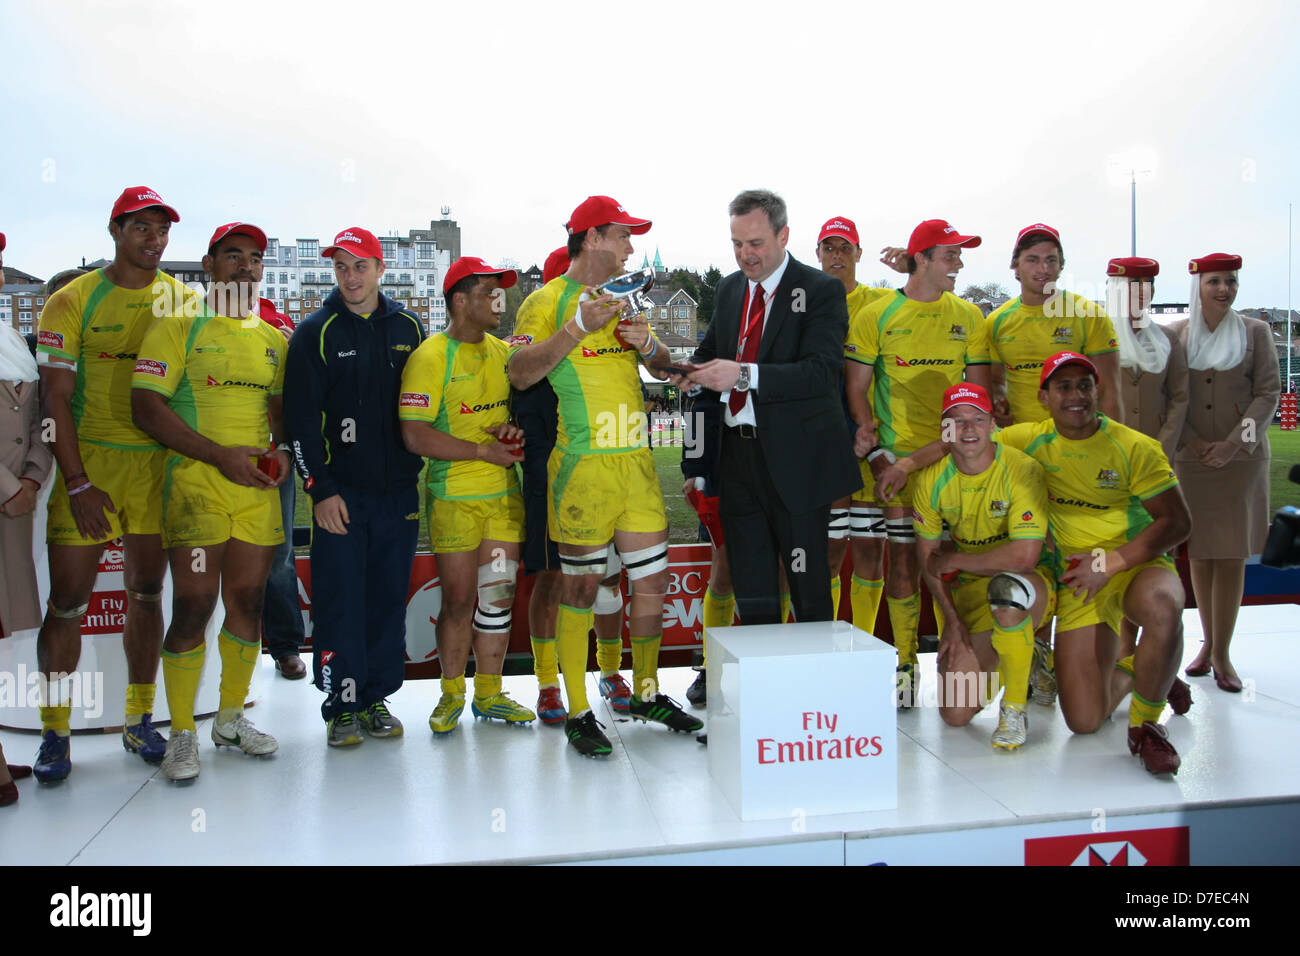 Glasgow, Scotland, UK. 5th May 2013. The Bowl trophy presented to Australia after beating Kenya 12 - 5 during the 2013 Emirates Airline Glasgow 7s at Scotstoun Stadium Credit:  Elsie Kibue / EK13 Photos / Alamy Live News Stock Photo